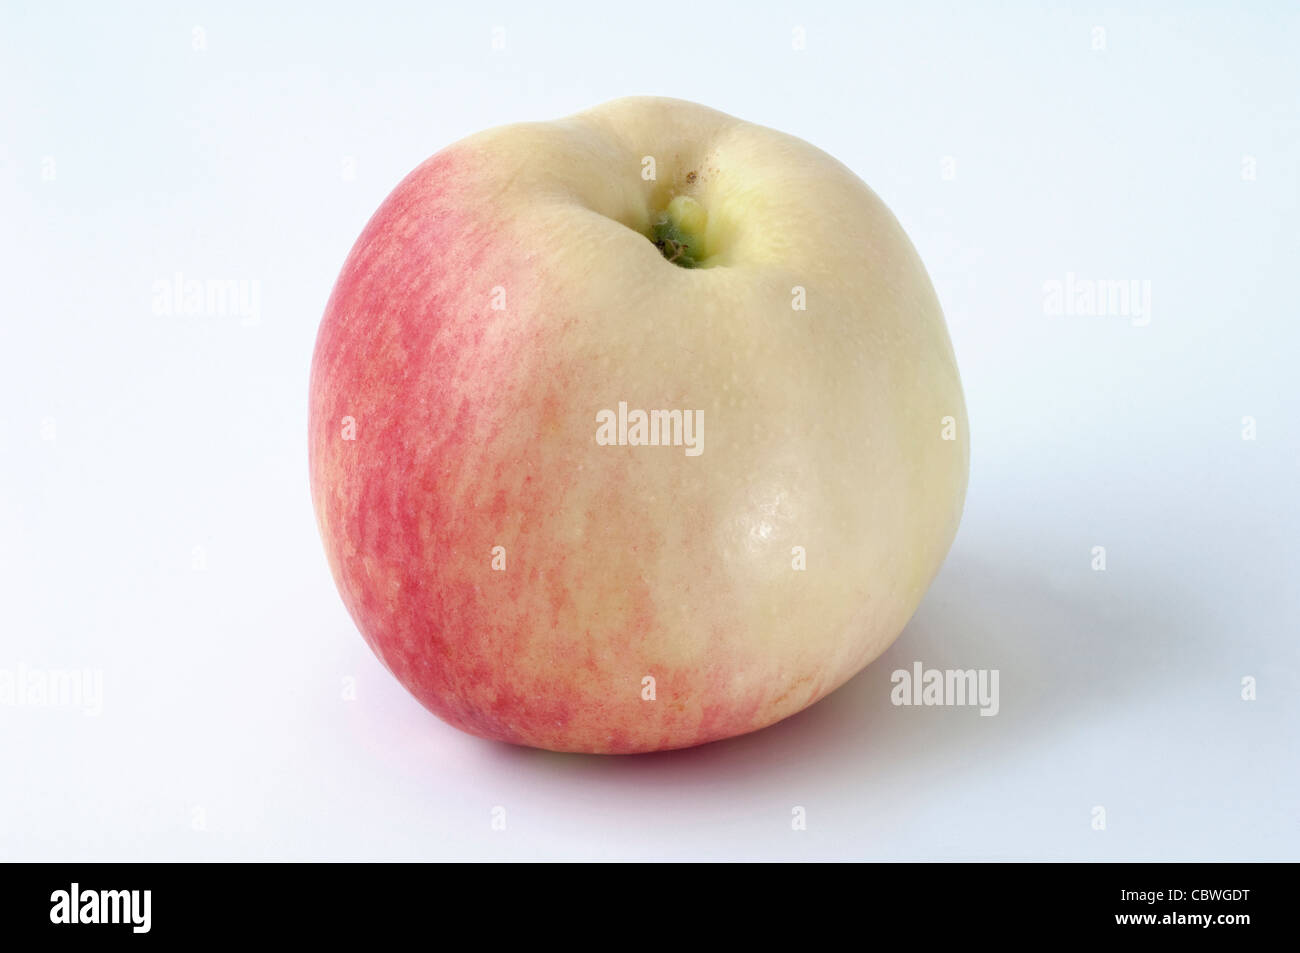 Domestic Apple (Malus domestica), variety: Jakob Fischer, ripe fruit. Studio picture against a white background. Stock Photo